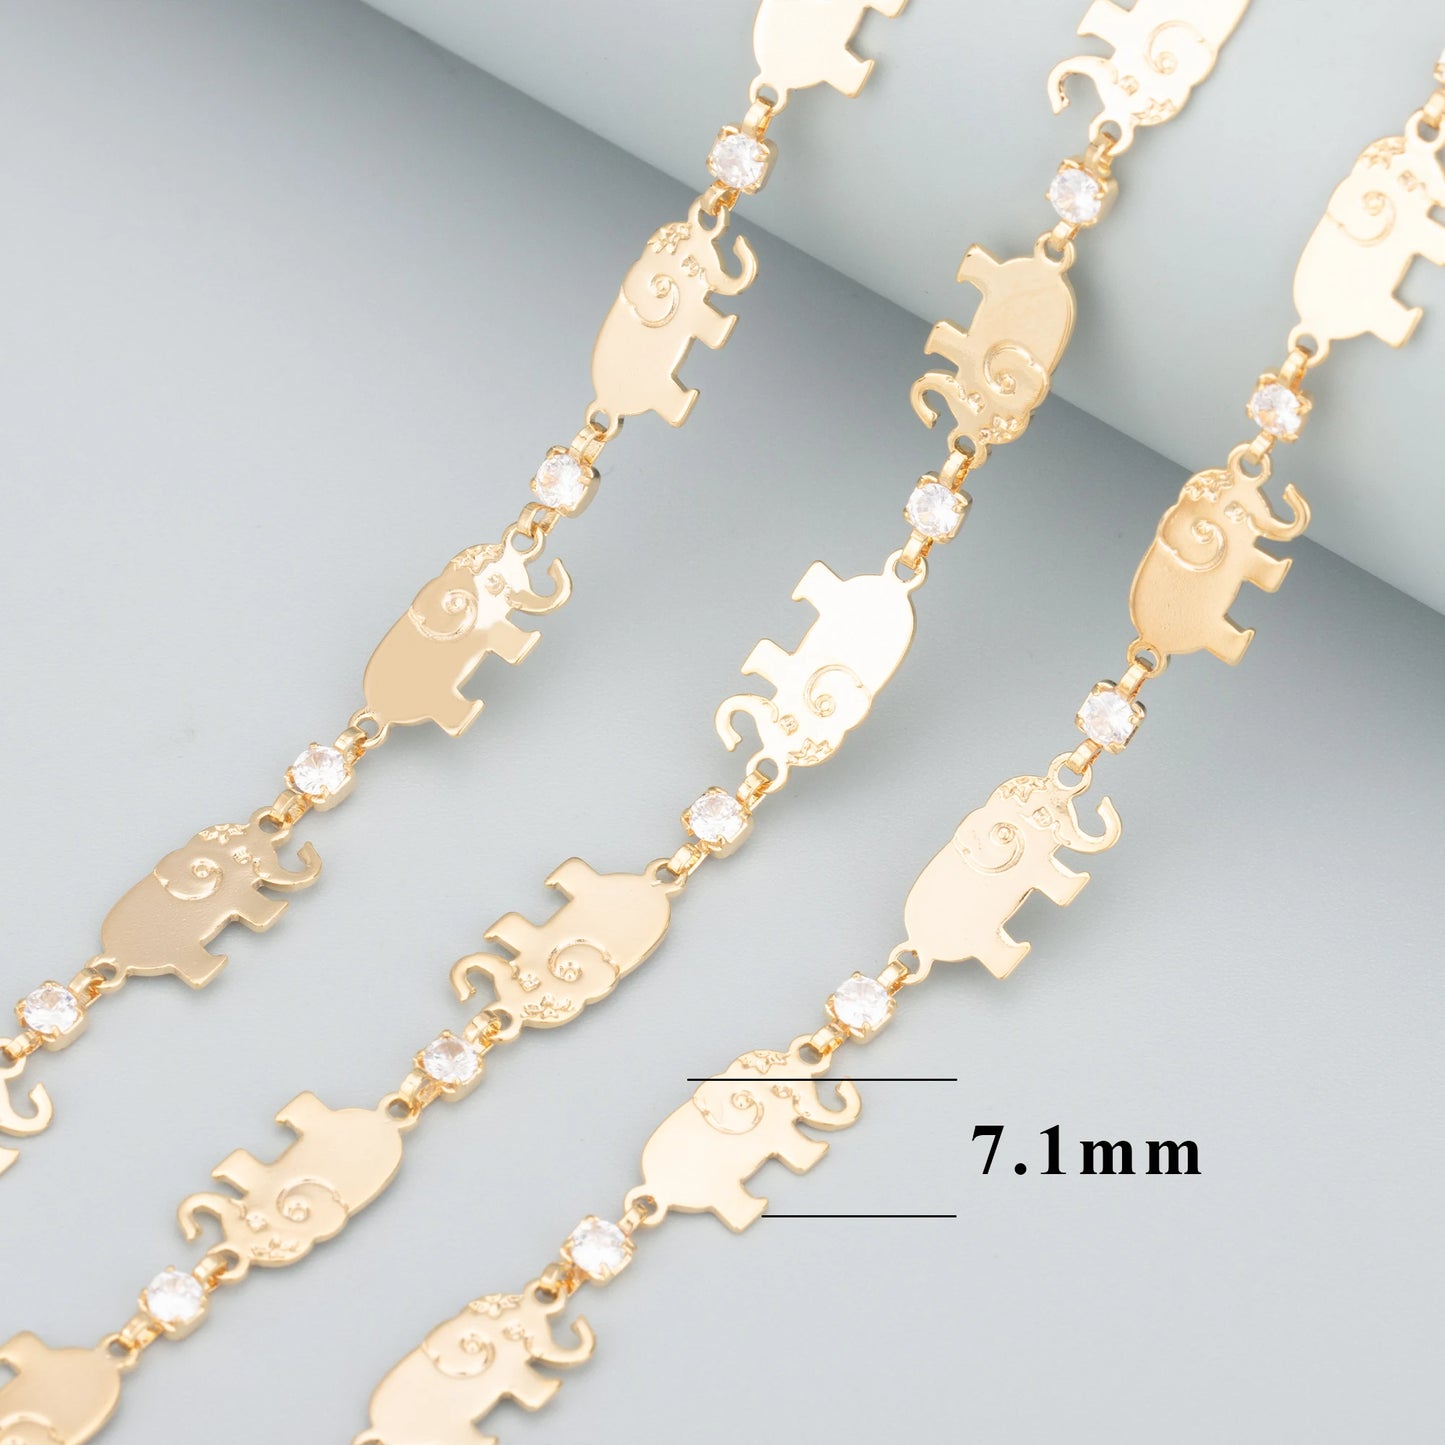 GUFEATHER C301,diy chain,nickel free,18k gold rhodium plated,copper,zircons,jewelry making findings,diy bracelet necklace,1m/lot